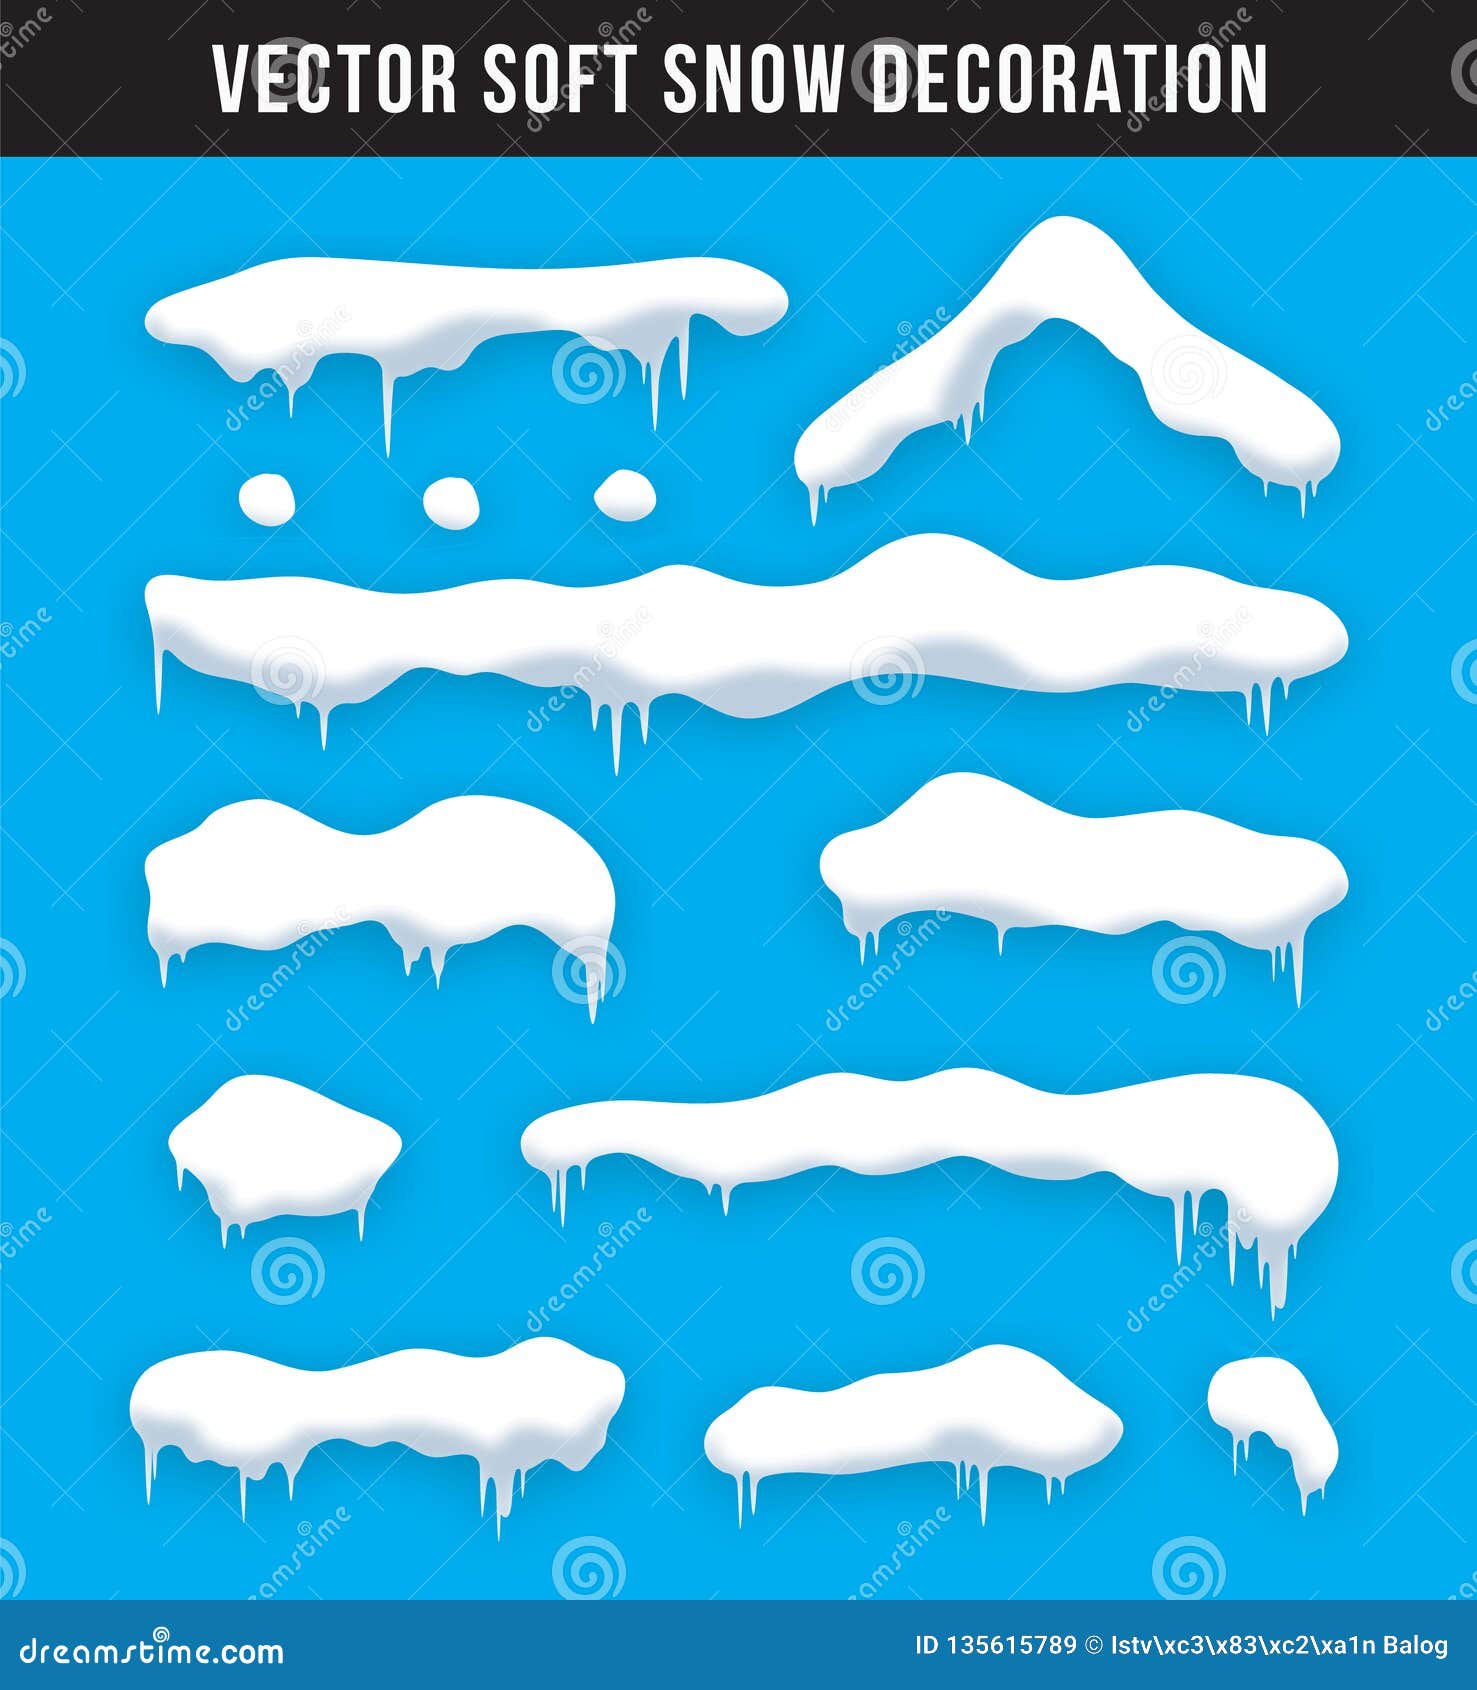 Download Snow Cap Vector Collection. Stock Vector - Illustration of ...